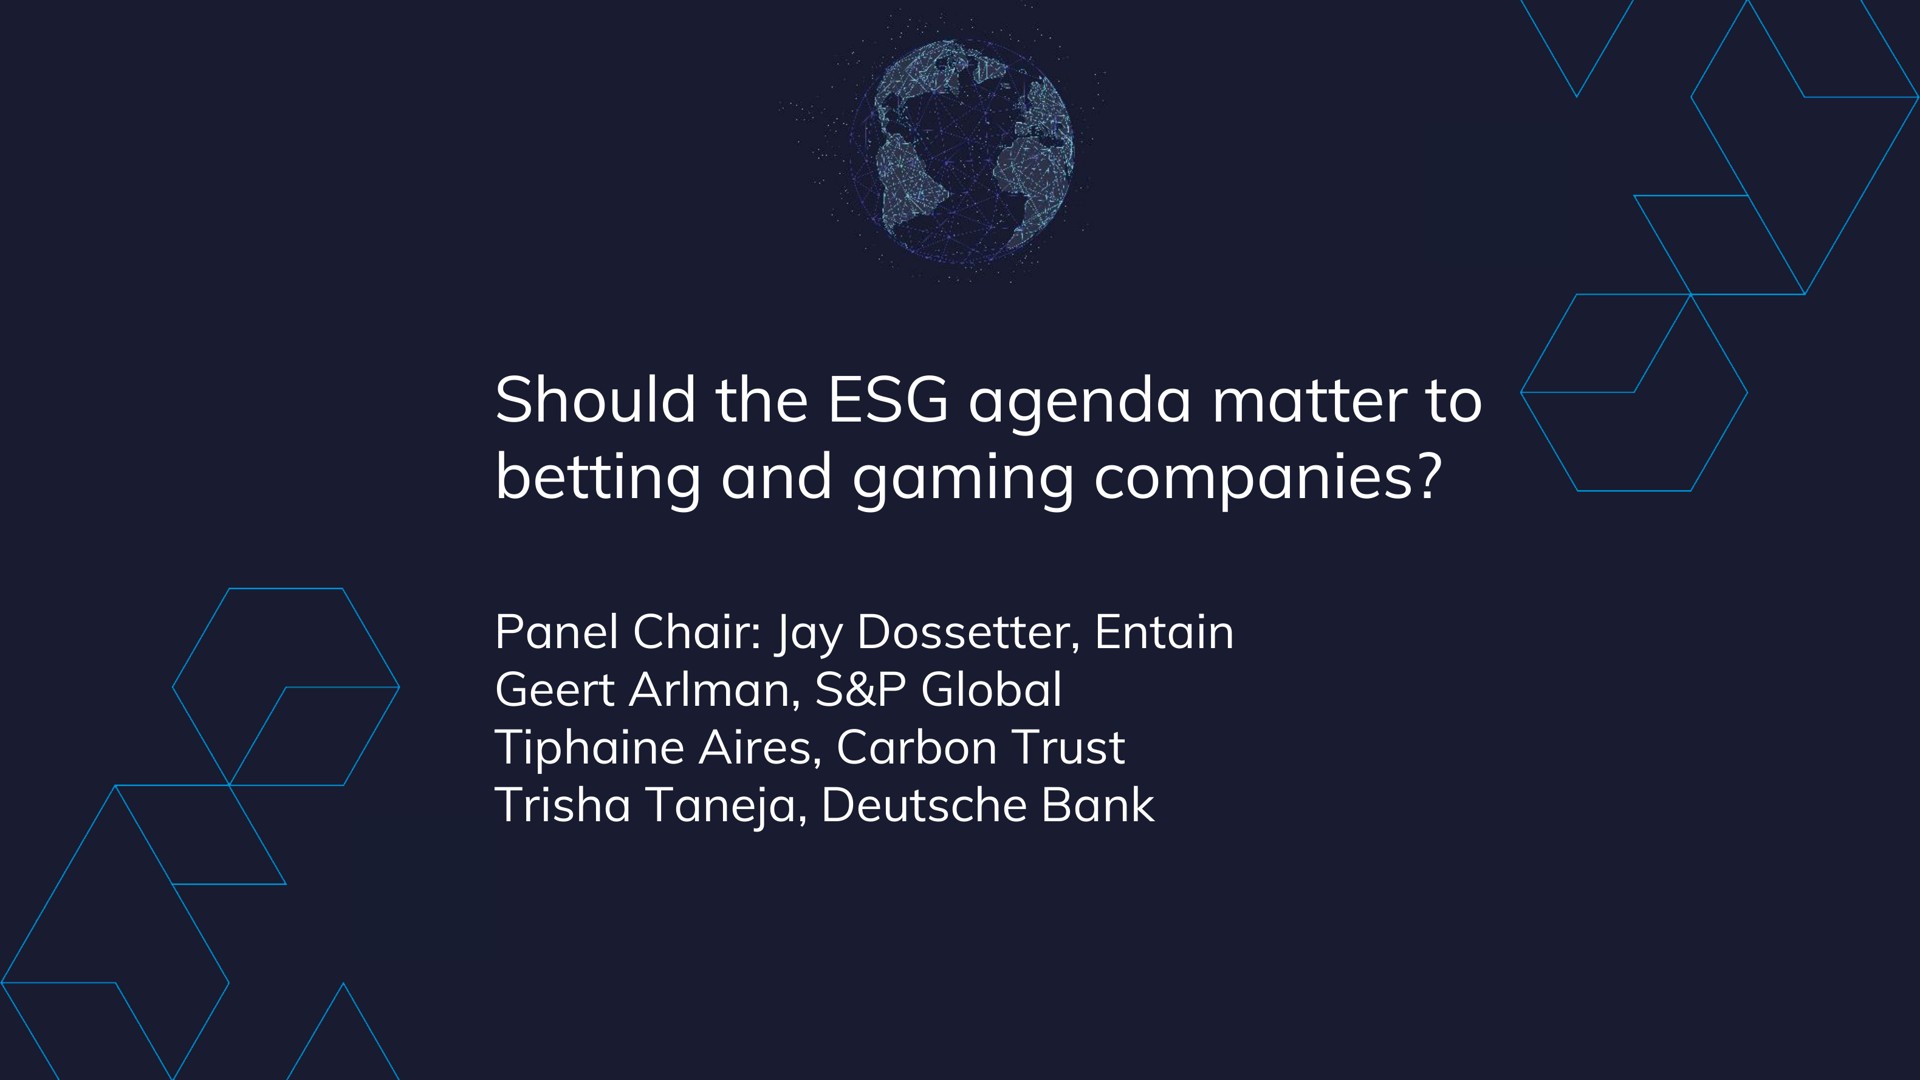 should the agenda matter to betting and gaming companies | Entain Group